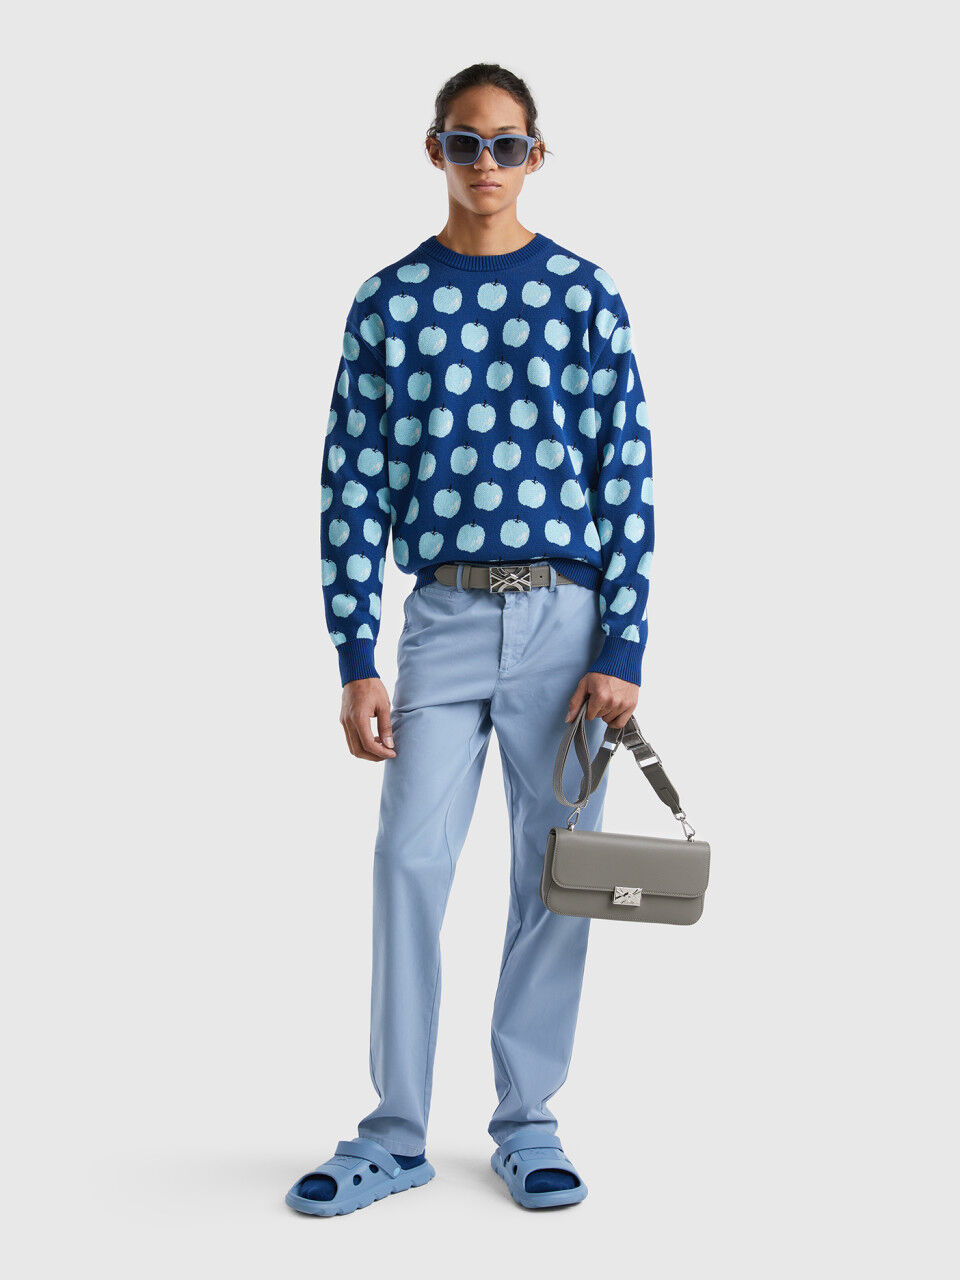 Blue sweater with apple pattern